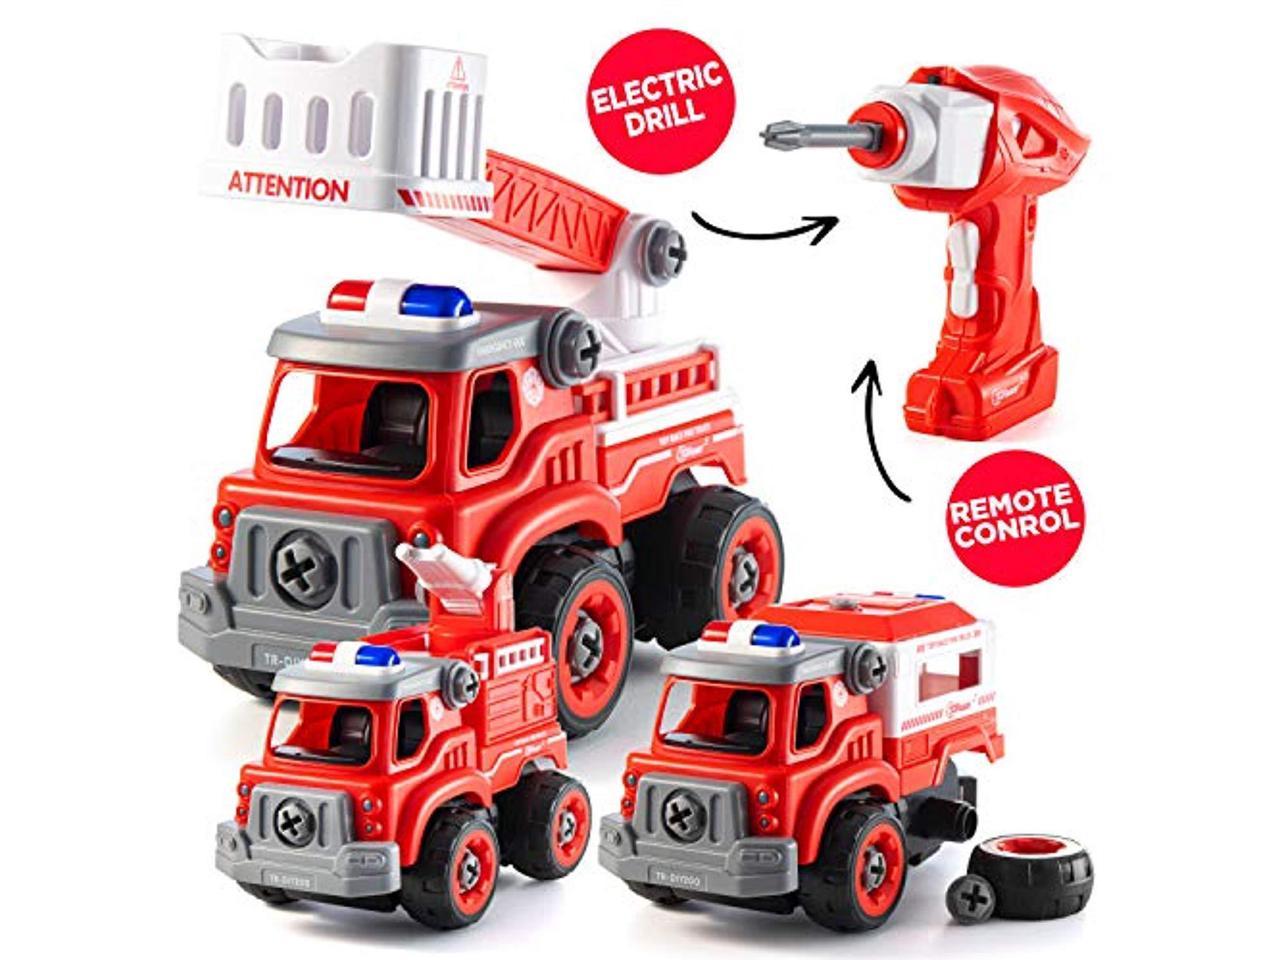 NEW Take Apart Toys Remote Control Construction Truck for Boys RC Car STEM Toy